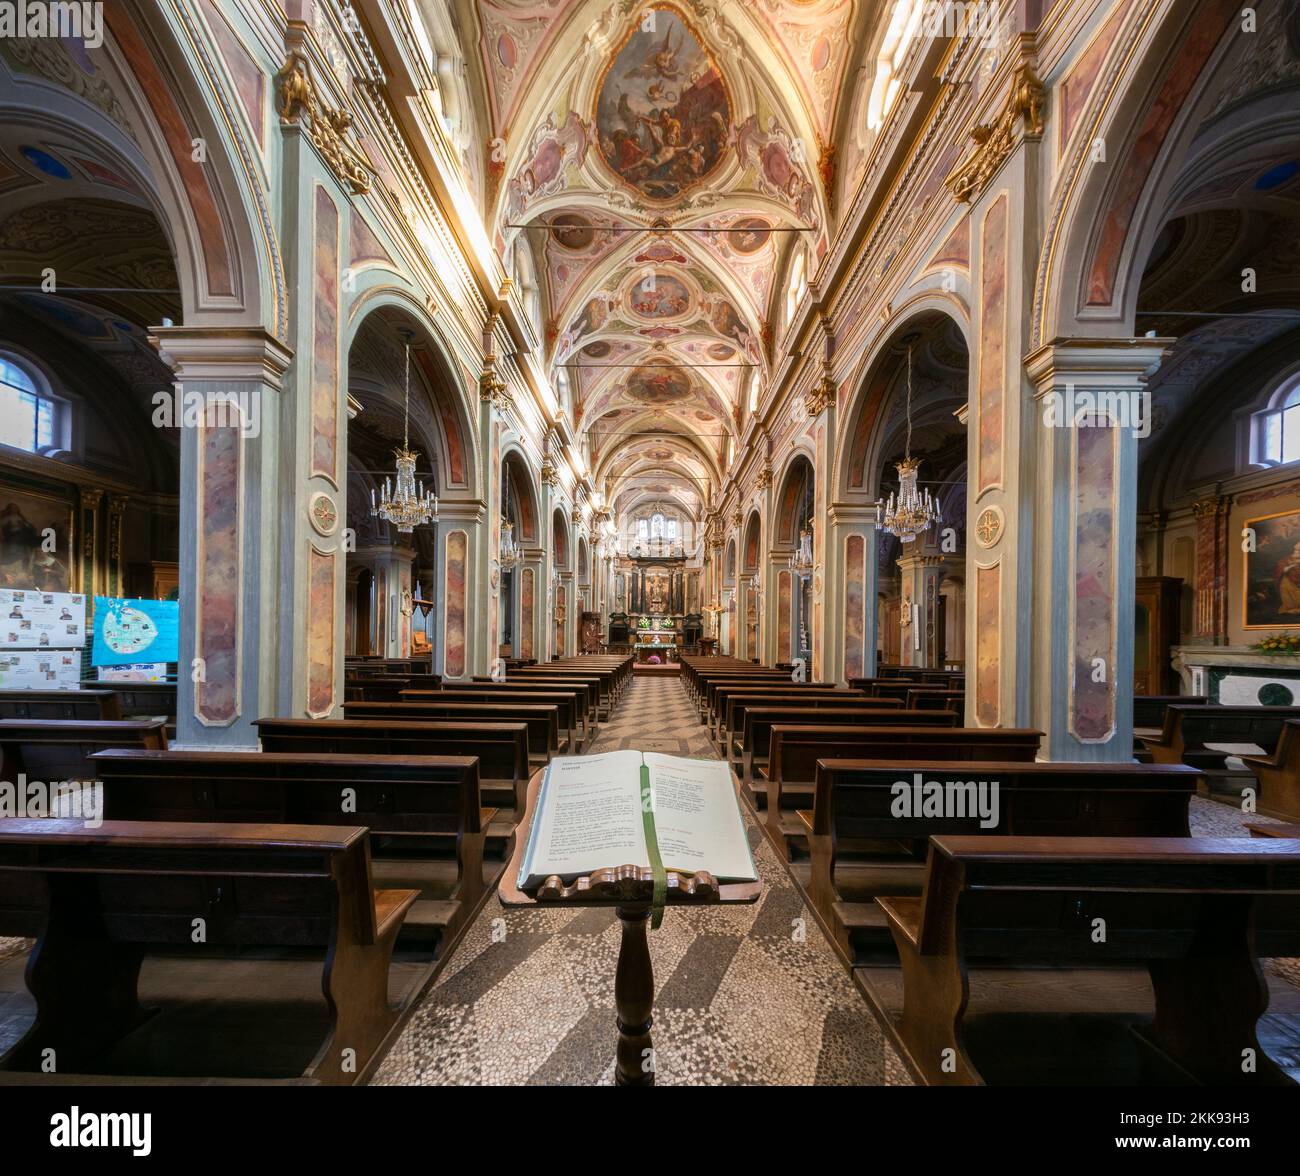 Boves, Italy - November 22, 2022: interior with frescoed vaults of parish church of san Bartolomeo with missal liturgical book in  foreground Stock Photo